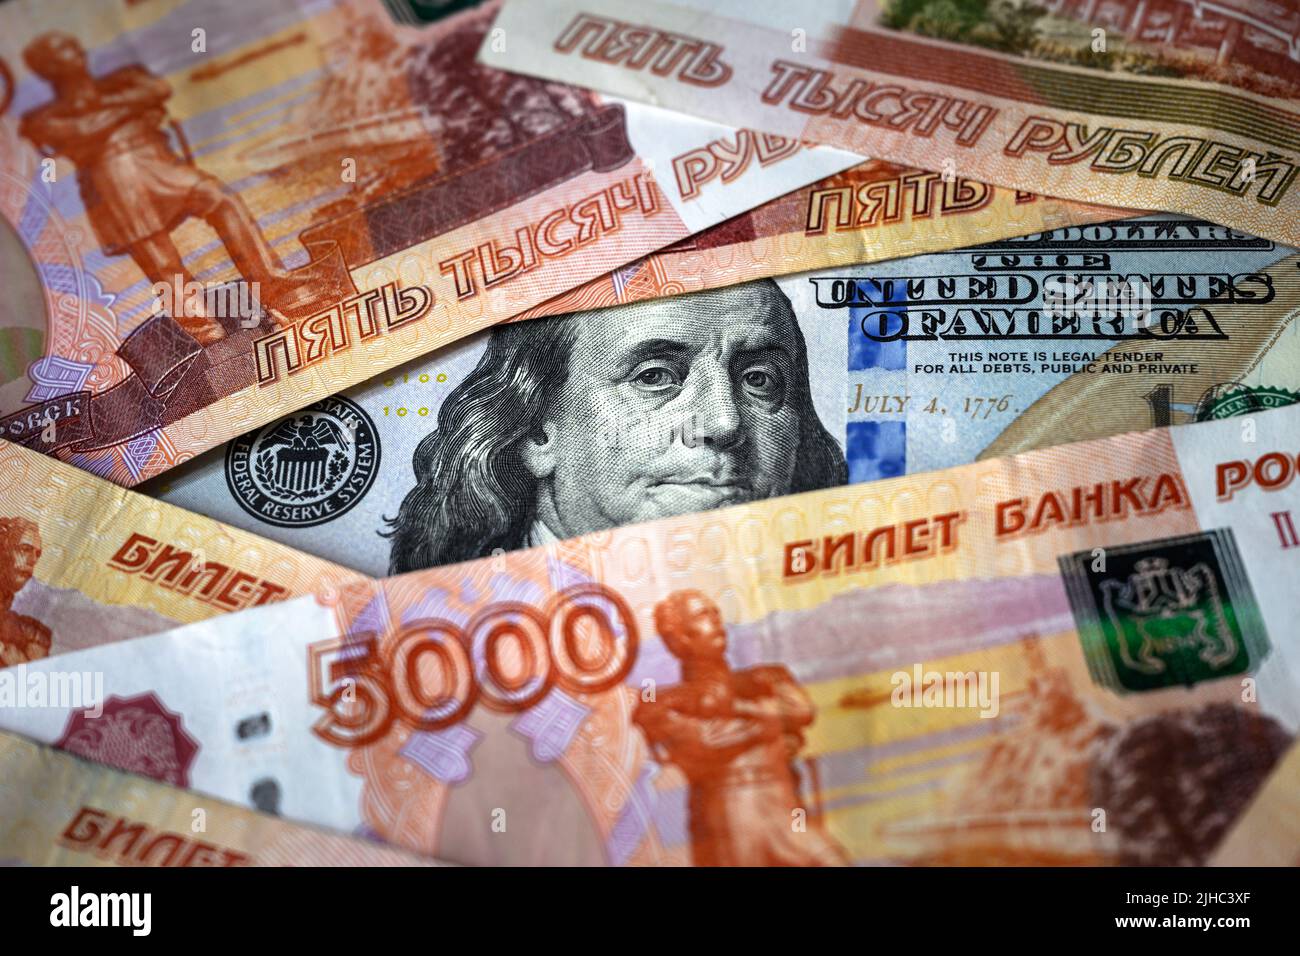 Russian ruble money vs US dollar, Franklin from 100 dollar bill watches through ruble banknote pile. Concept of USD, sanctions, currency, confrontatio Stock Photo